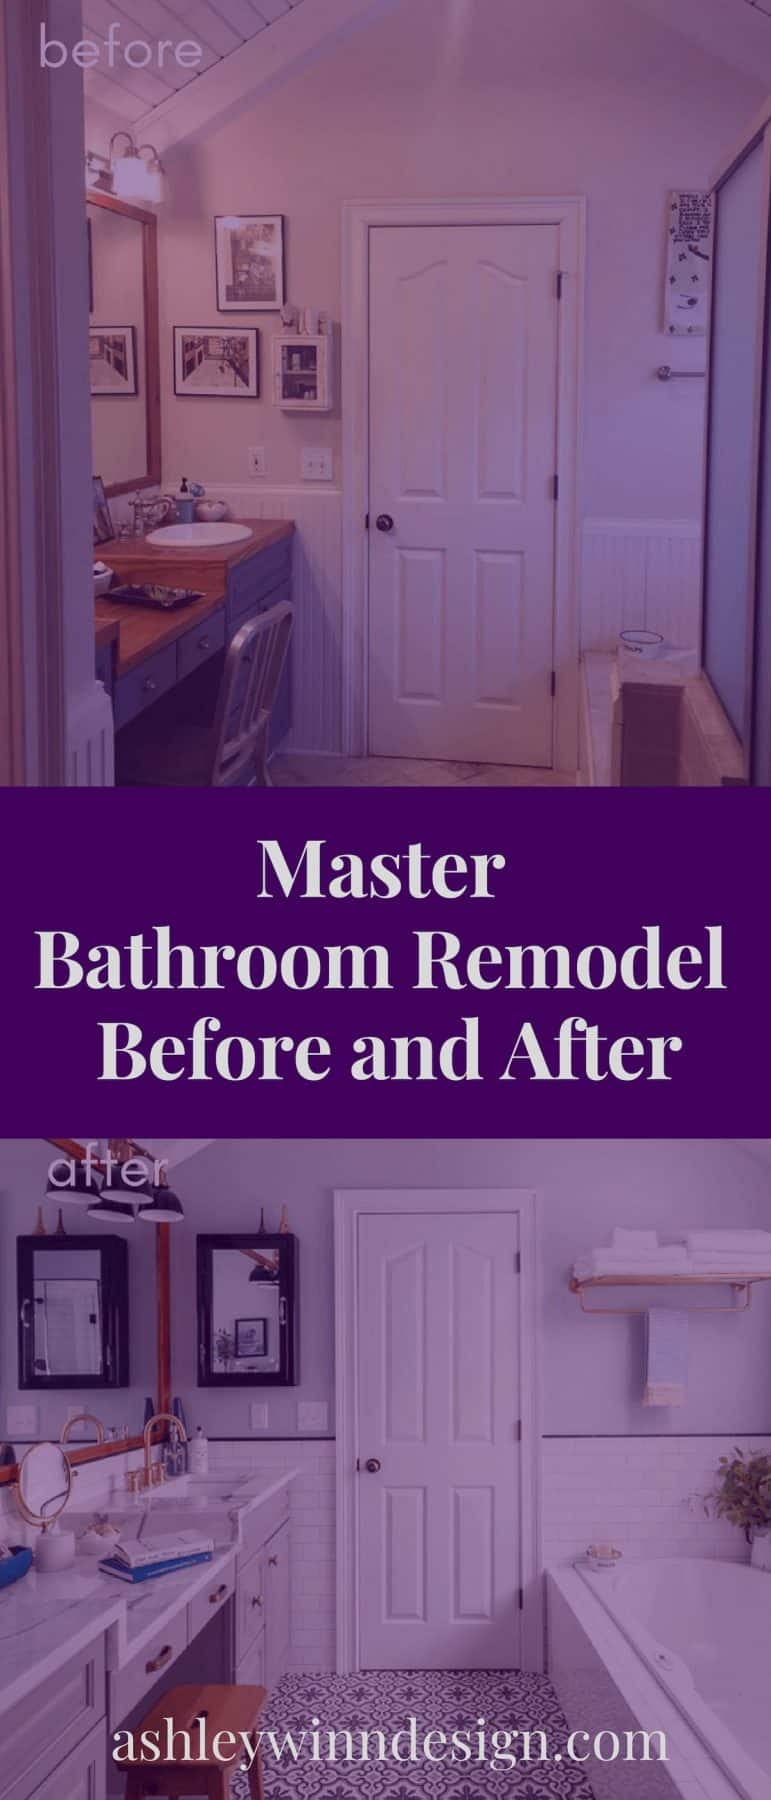 Master Bathroom Remodel Before and After